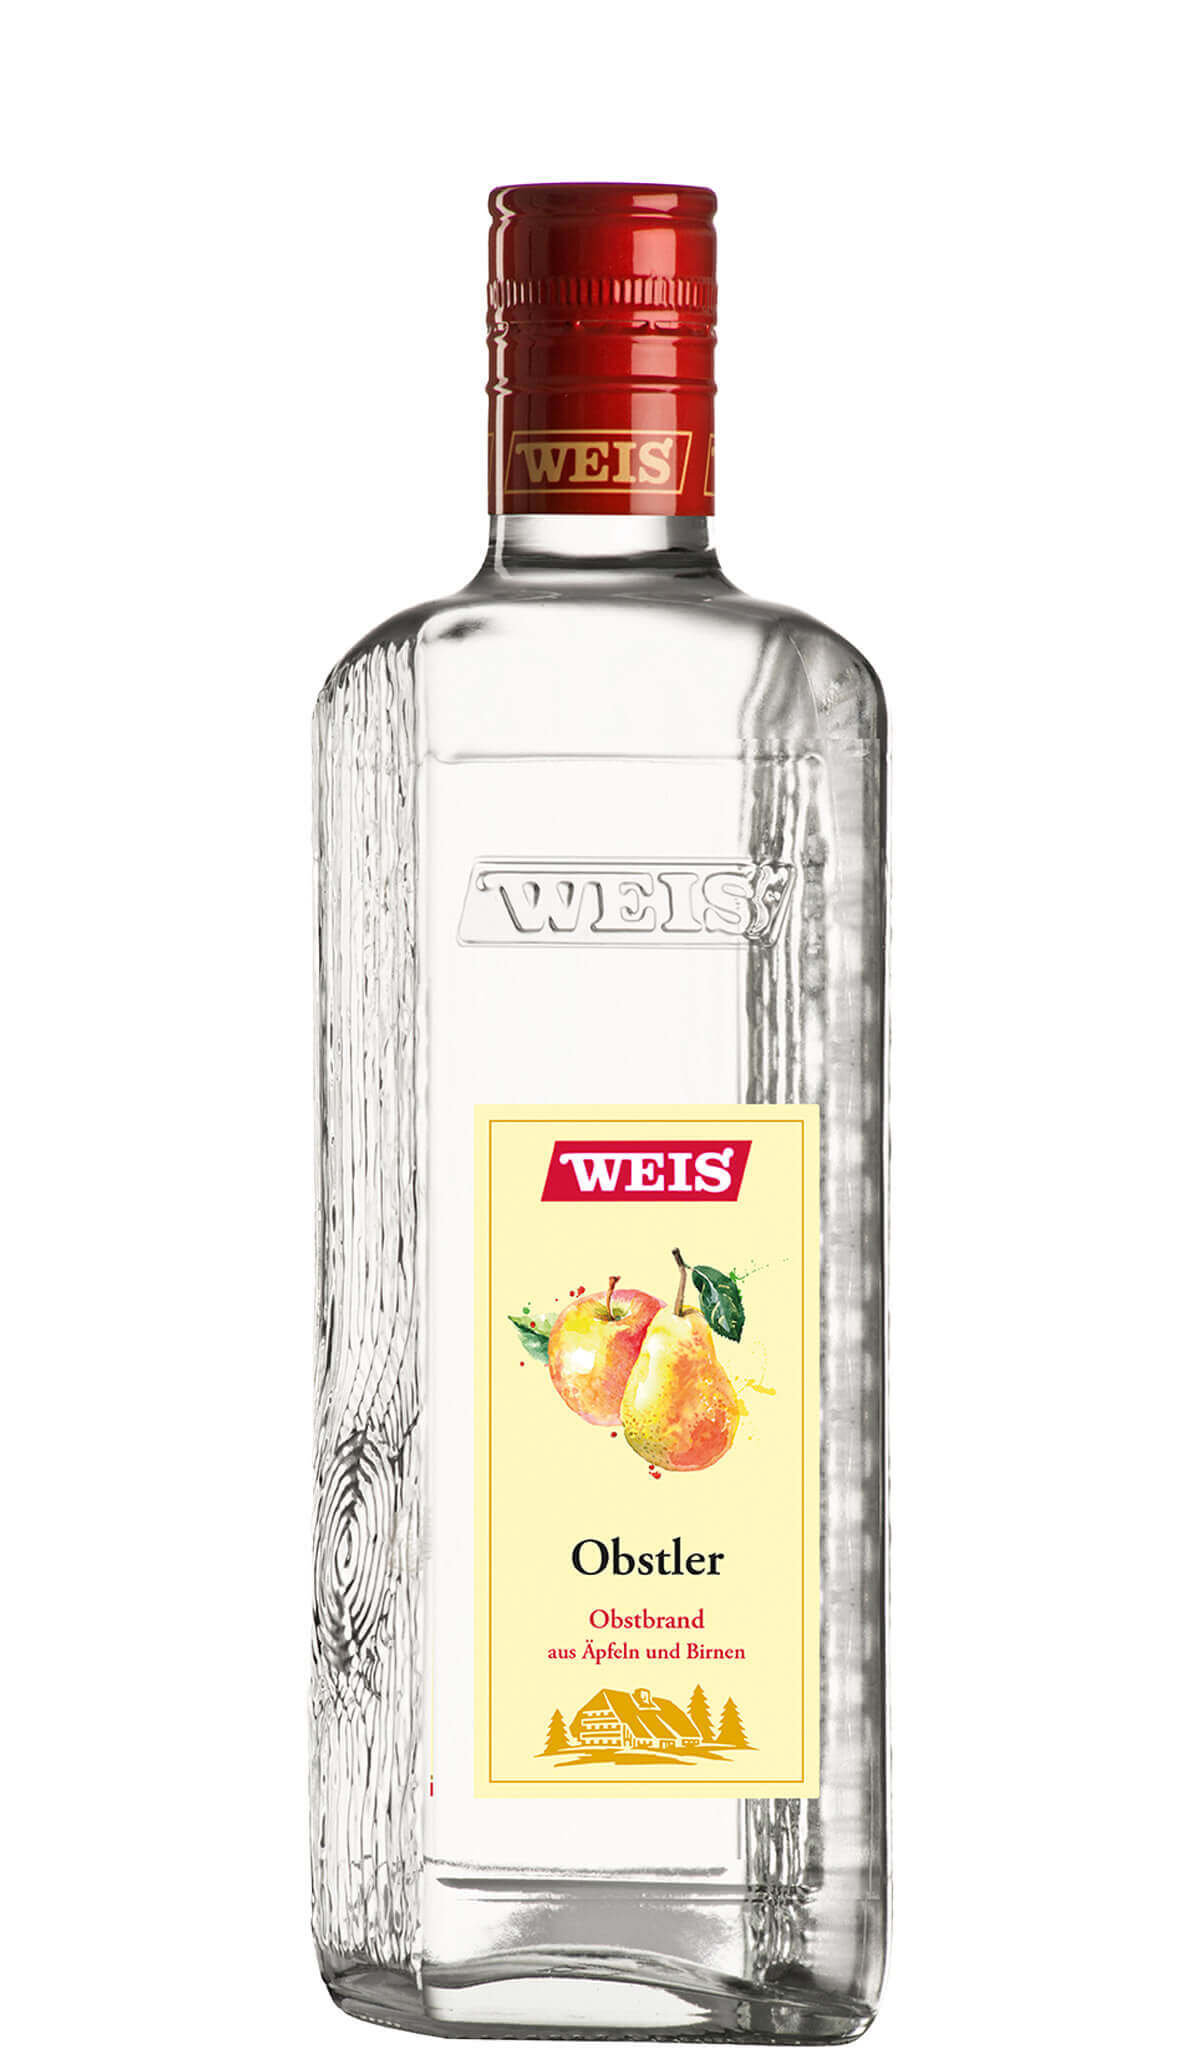 Find out more or buy Weis Obstler Apple & Pear Brandy 700ml online at Wine Sellers Direct - Australia’s independent liquor specialists.